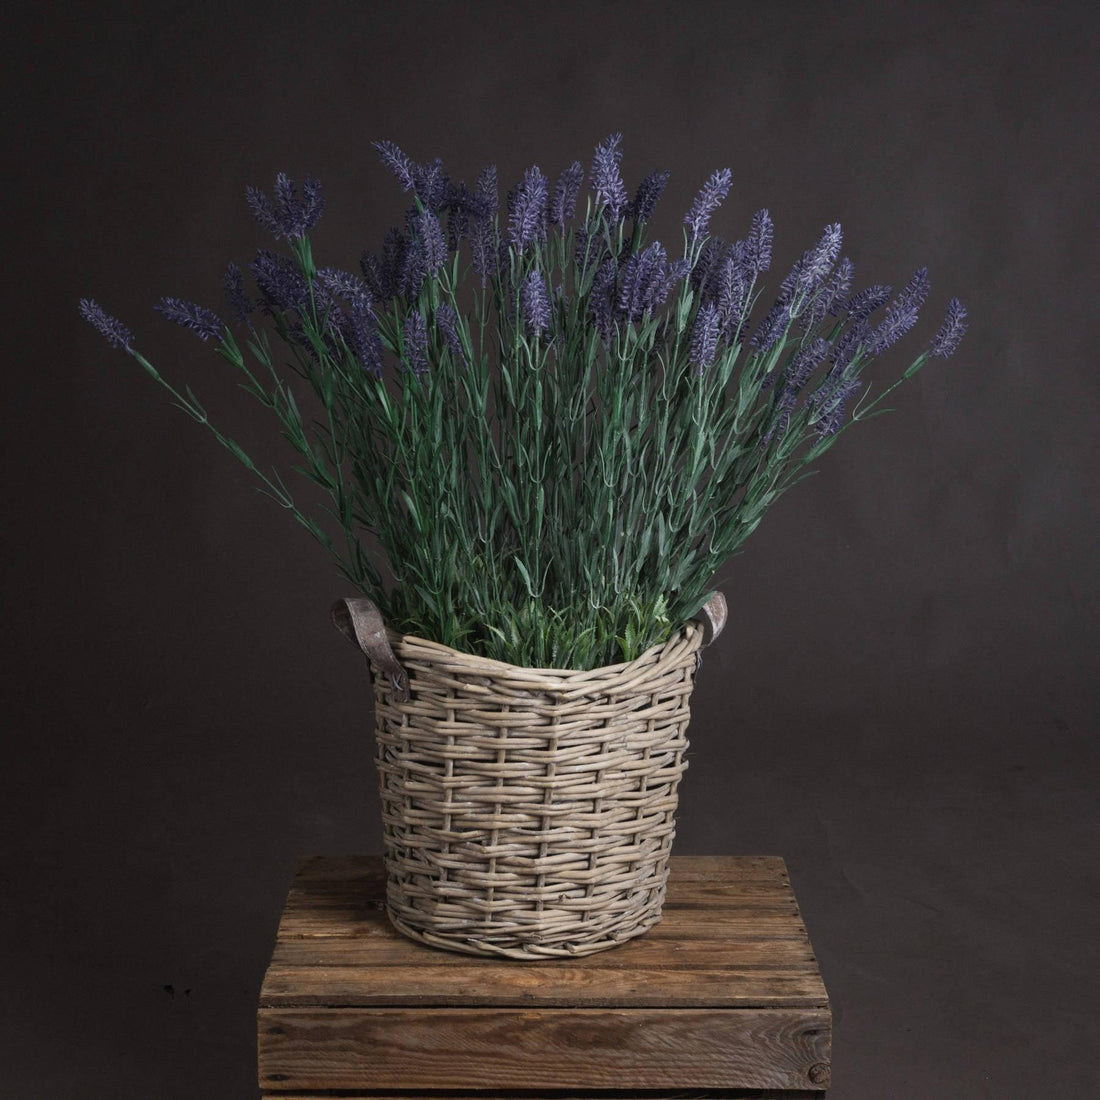 Large Lavender Spray - £19.95 - Artificial Flowers 